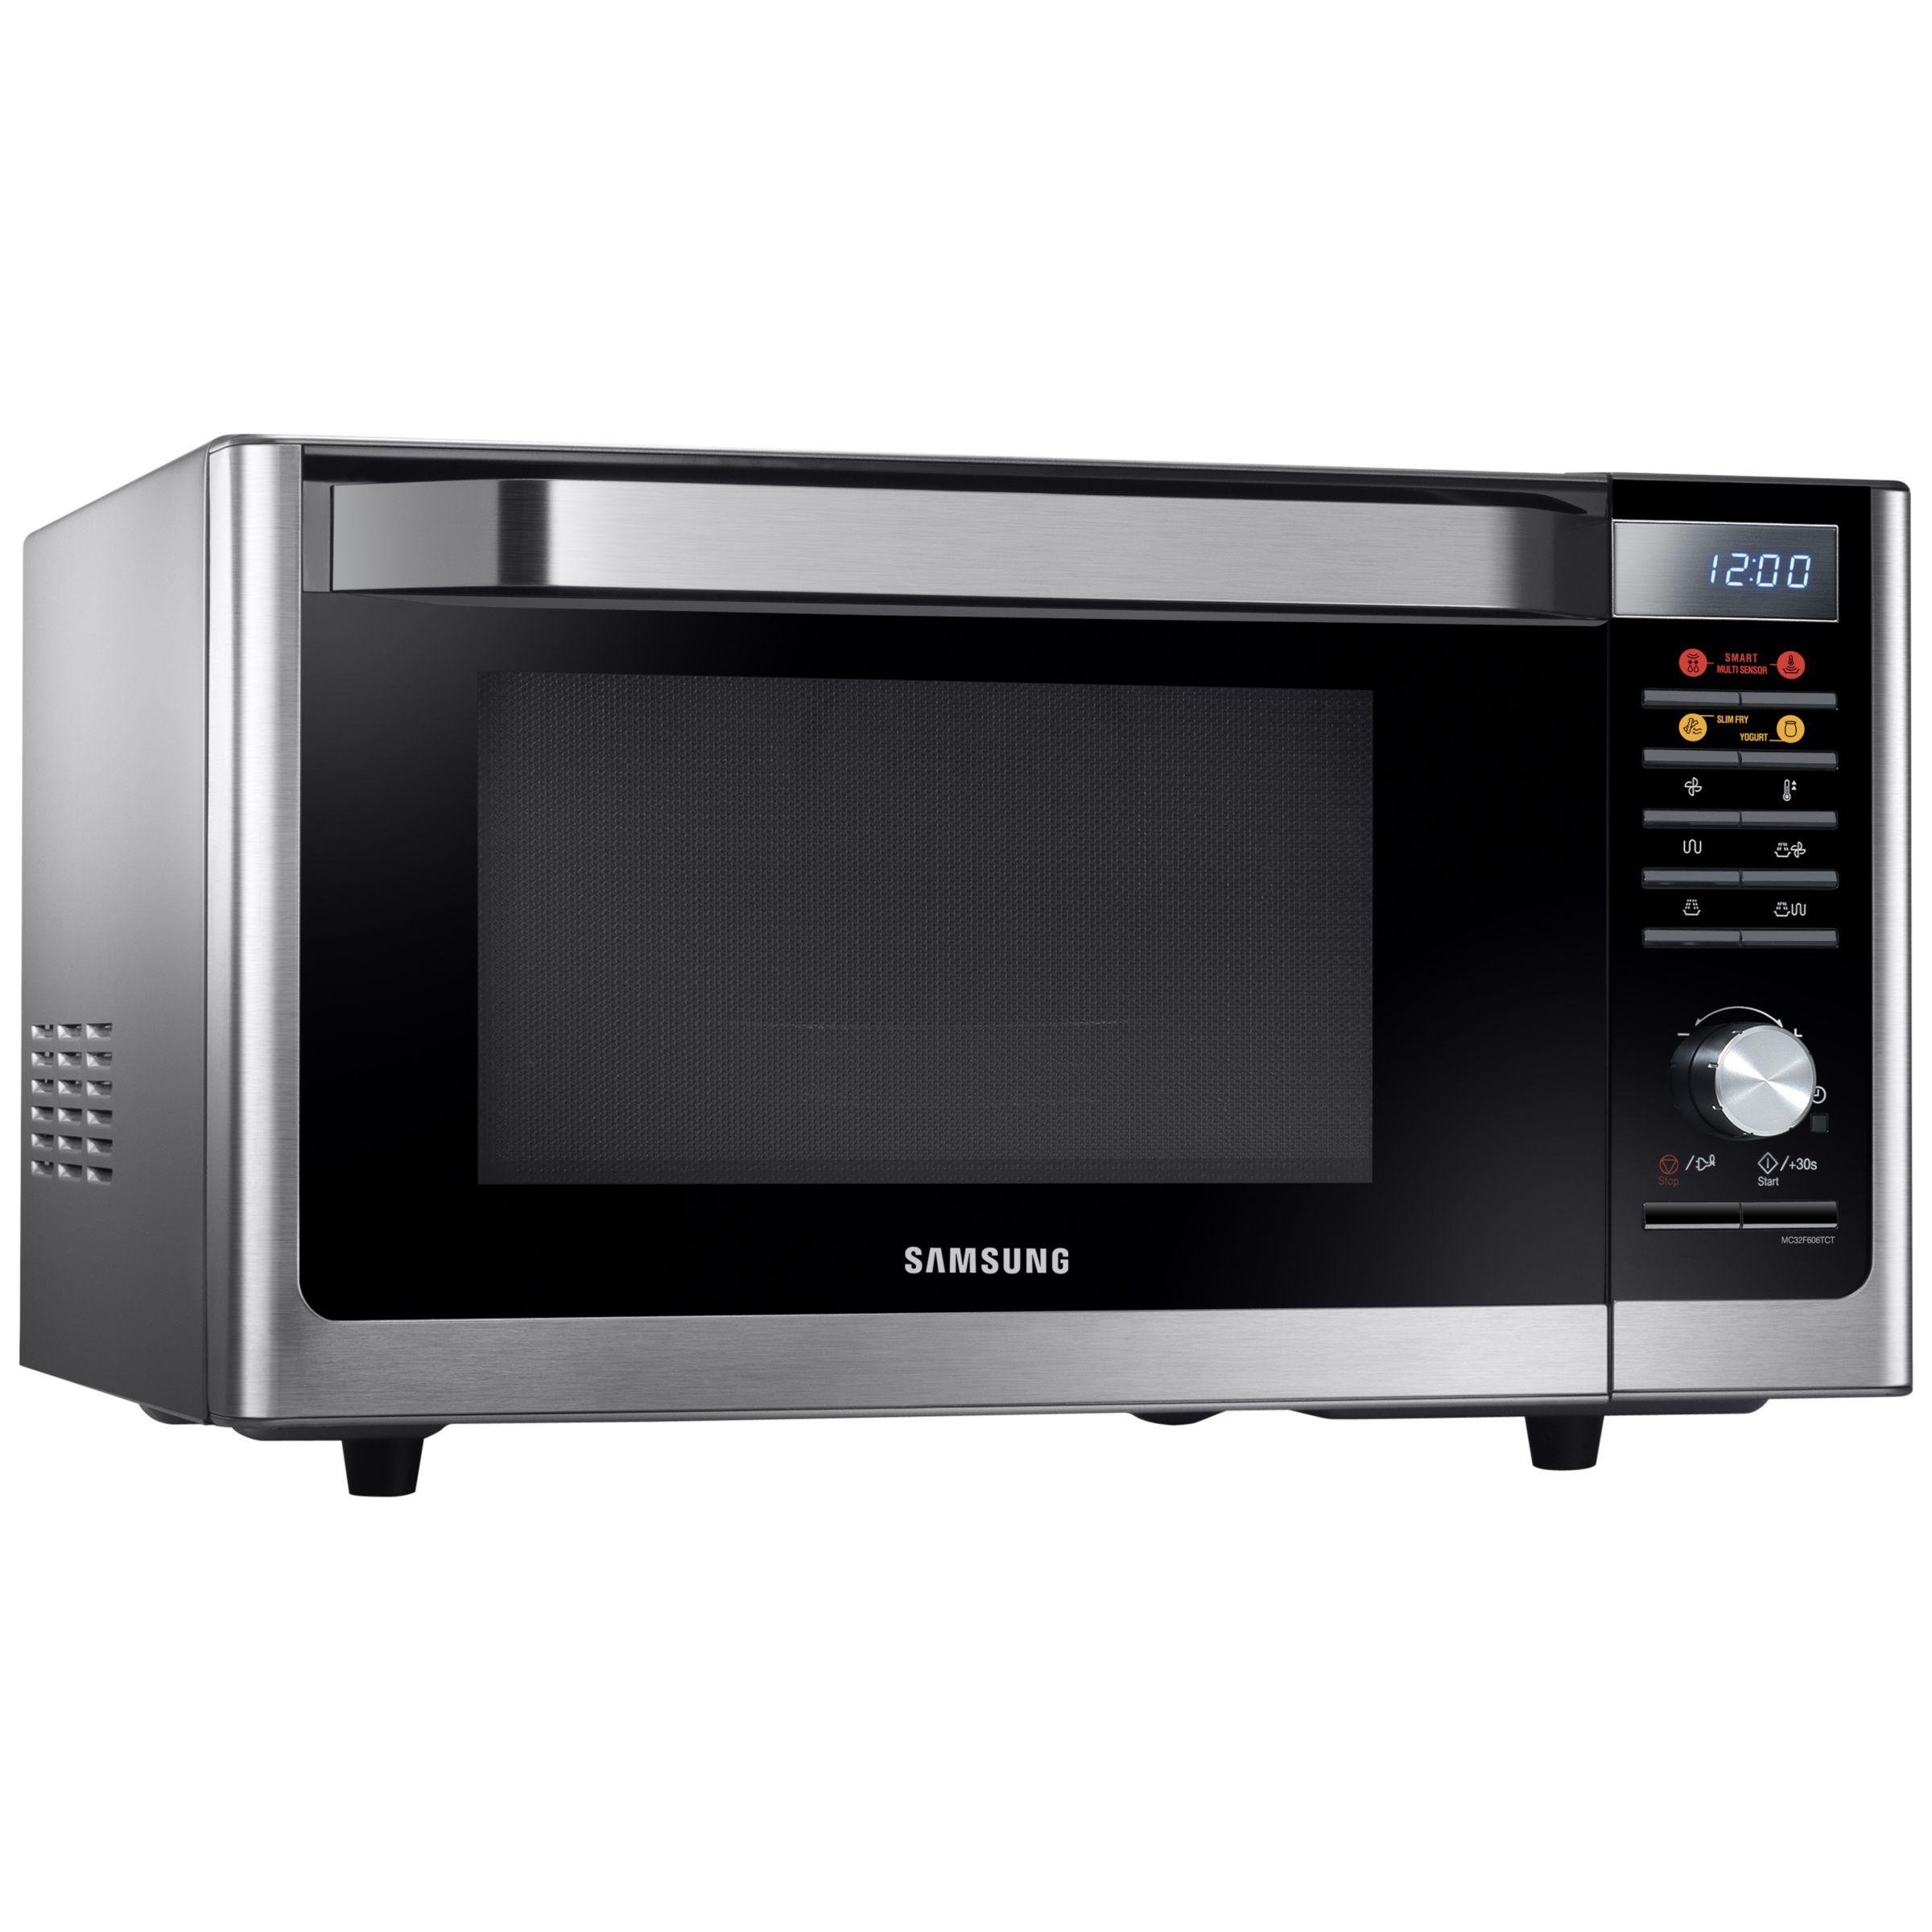 Samsung MC32F606TCT Smart Microwave Oven with Grill, Stainless Steel at